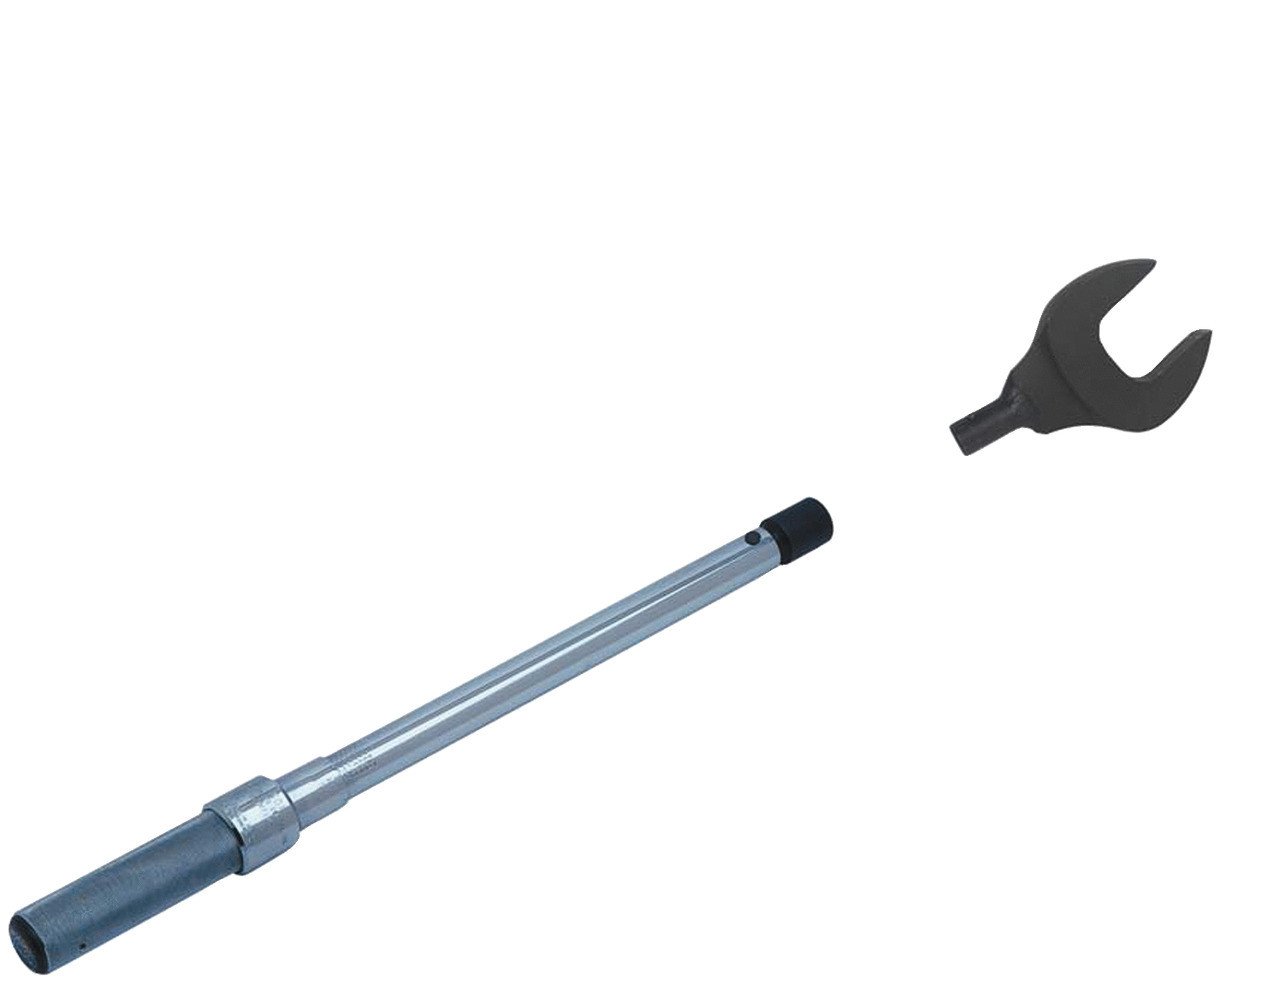 110.6 - 590 Ft Lbs / 150 - 800 Nm Williams Z Dual Pin Shank Adj Changeable Head Torque Wrench - 800NMIMHW